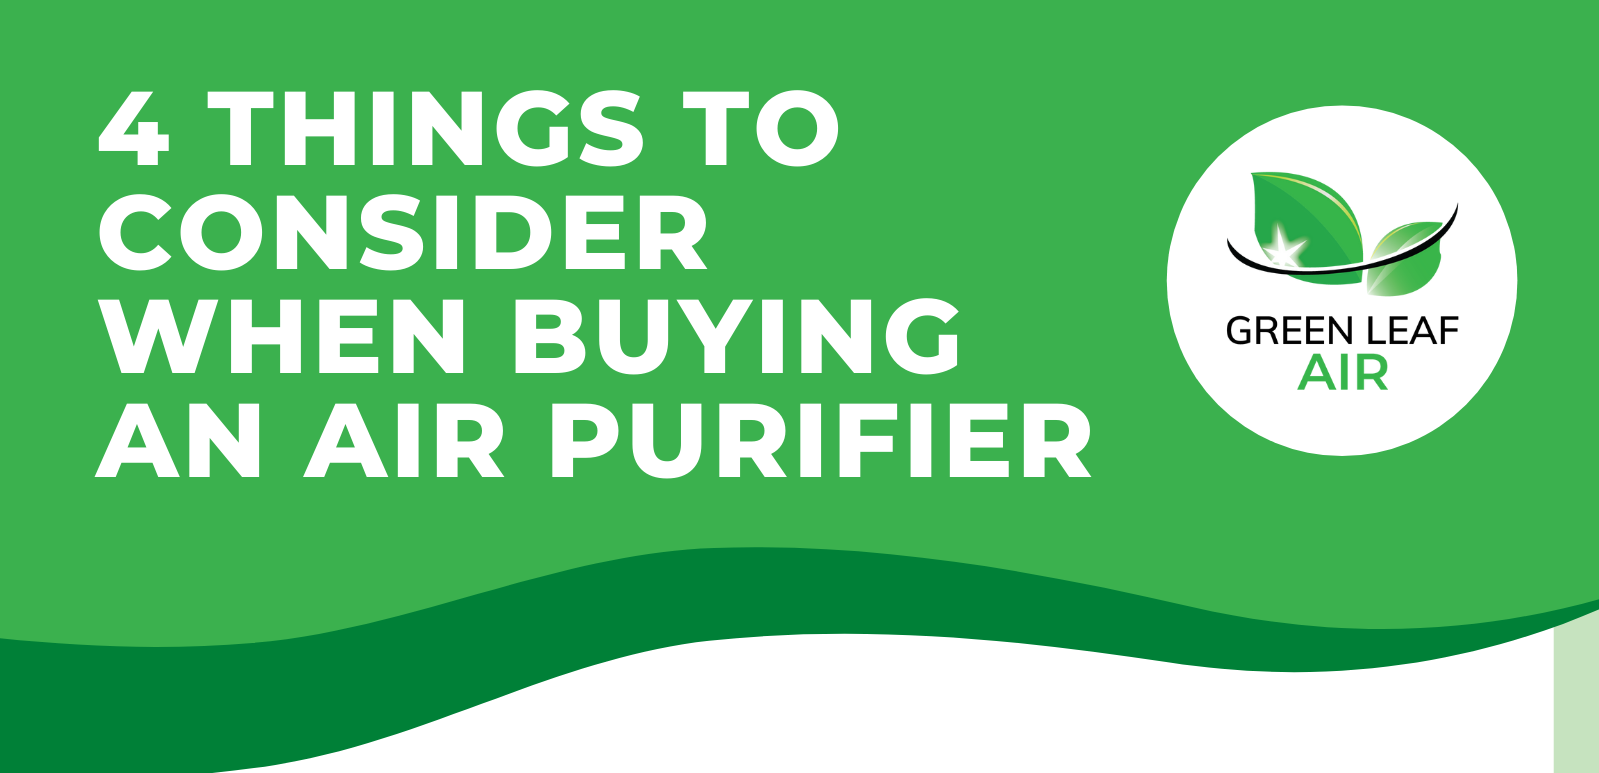 4 Things to Consider When Buying an Air Purifier